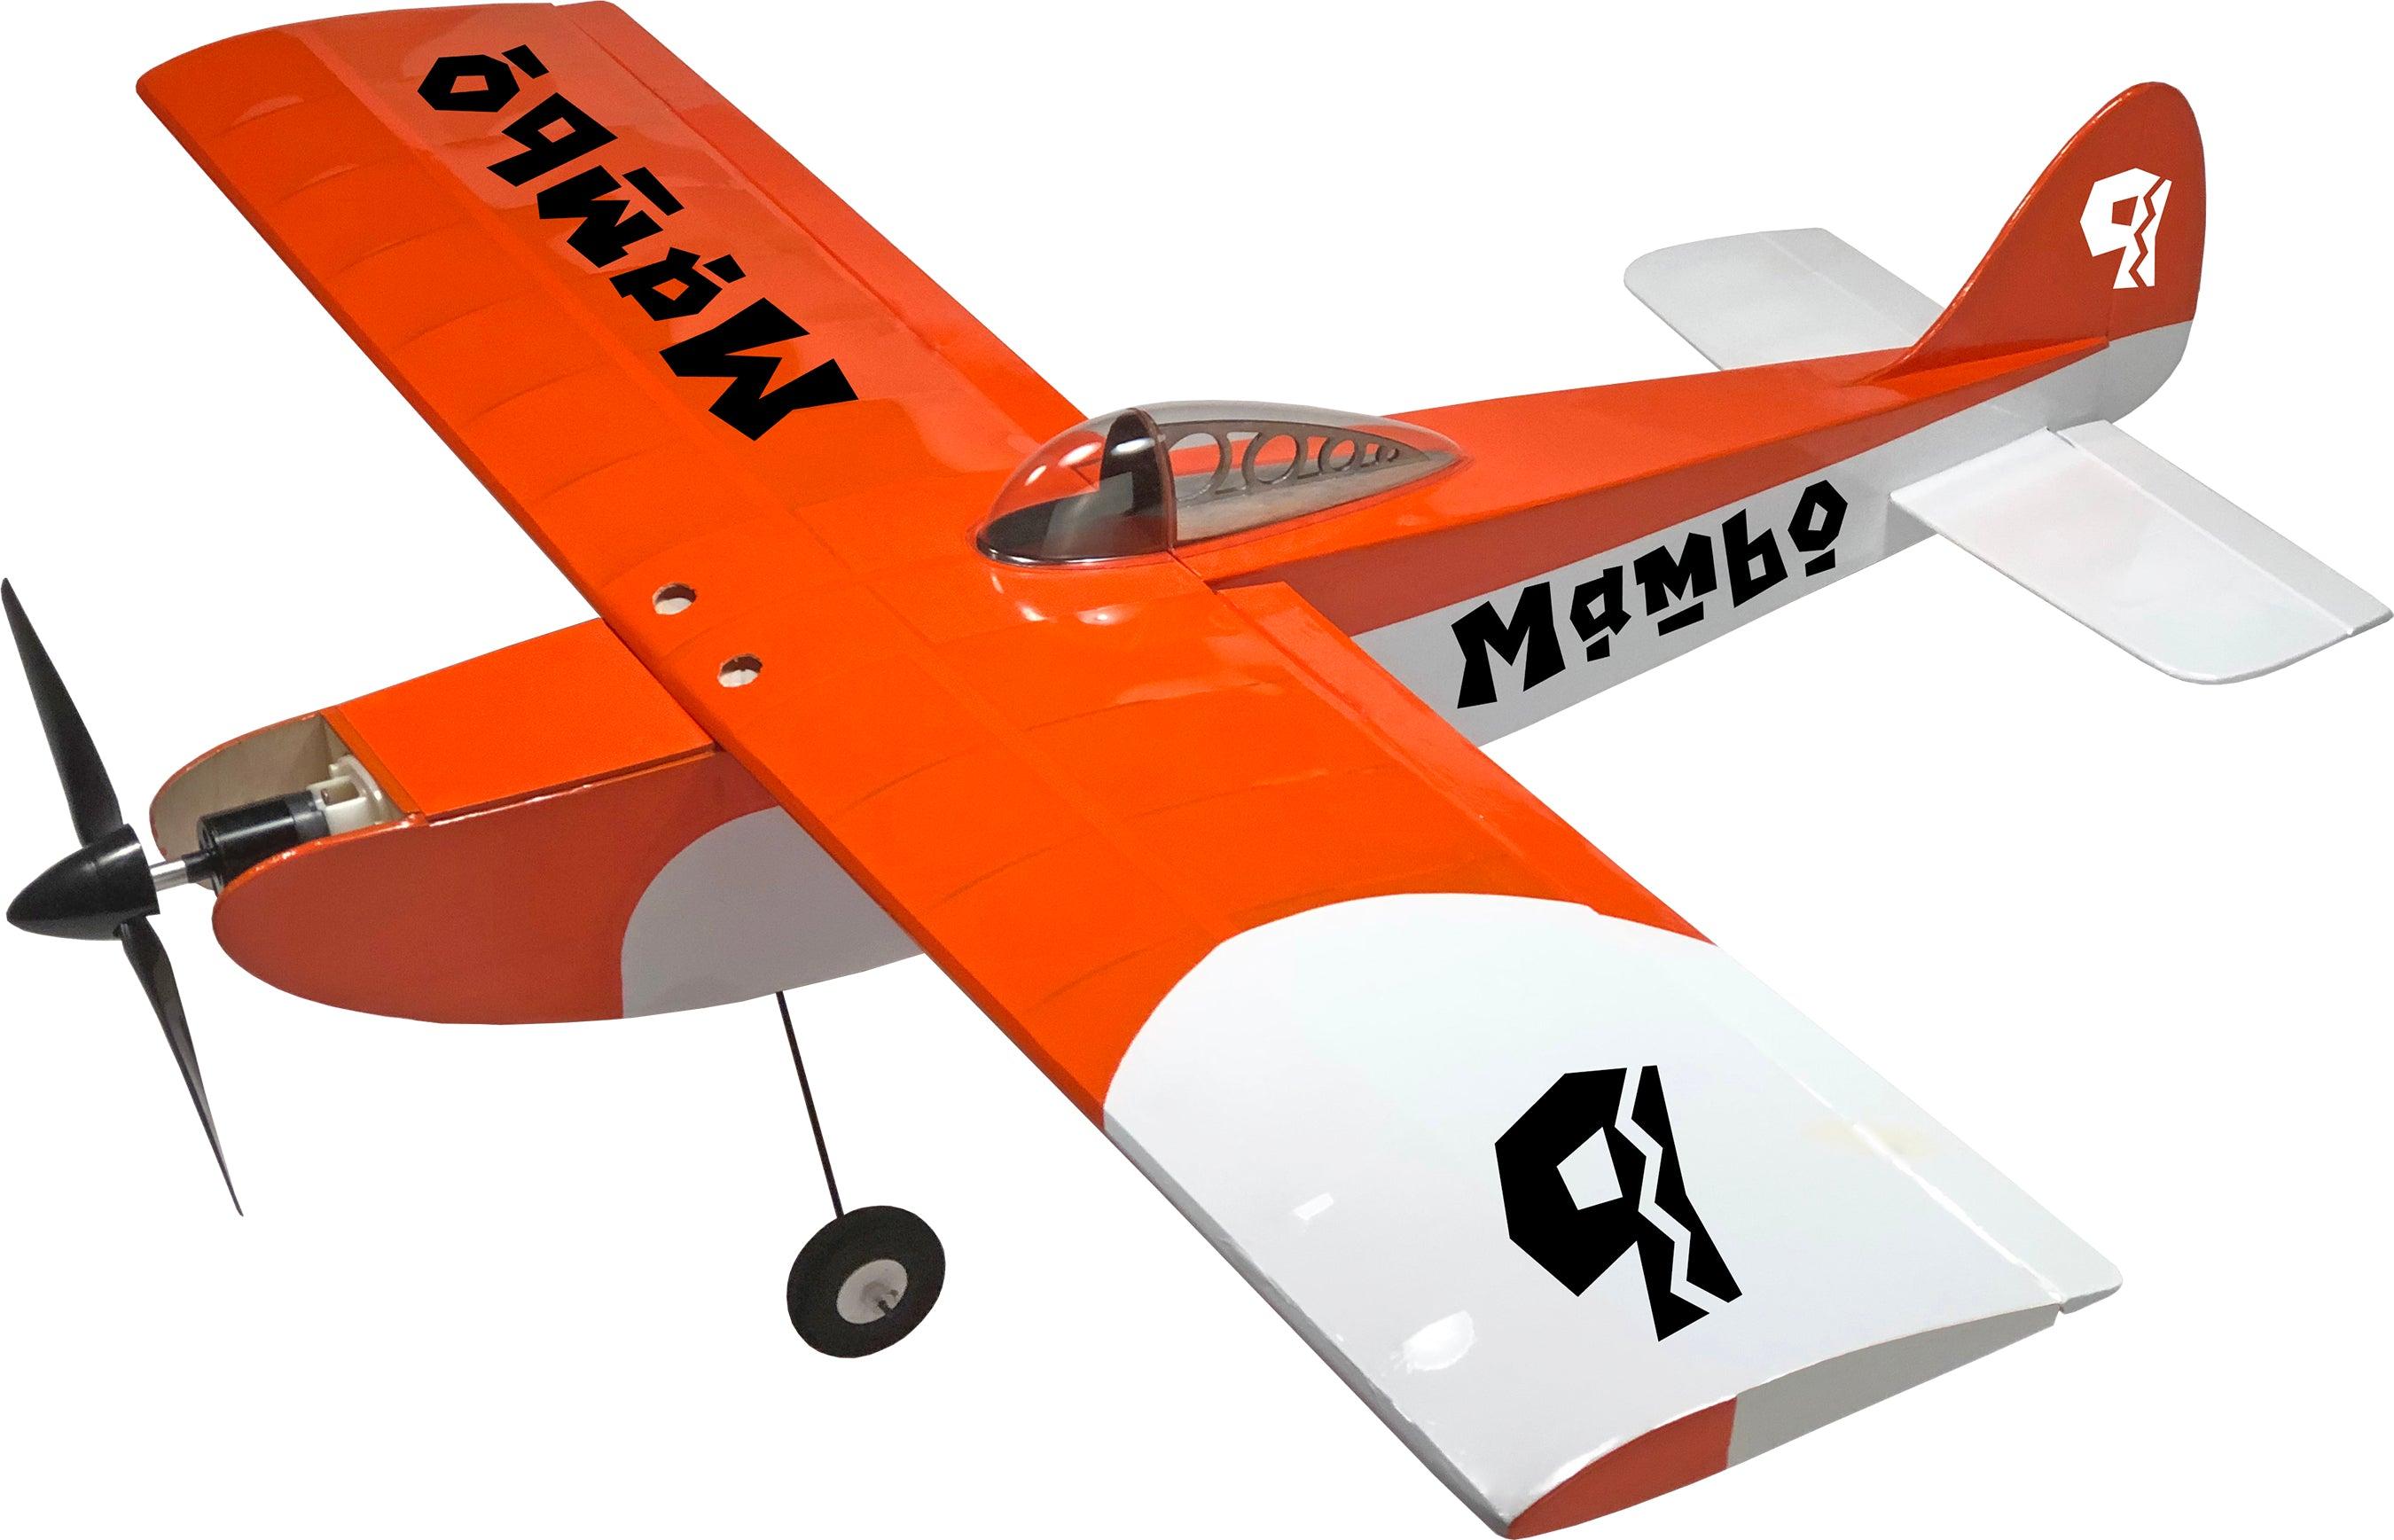 1/4 Scale Rc Airplane Kits: Important Factors to Consider